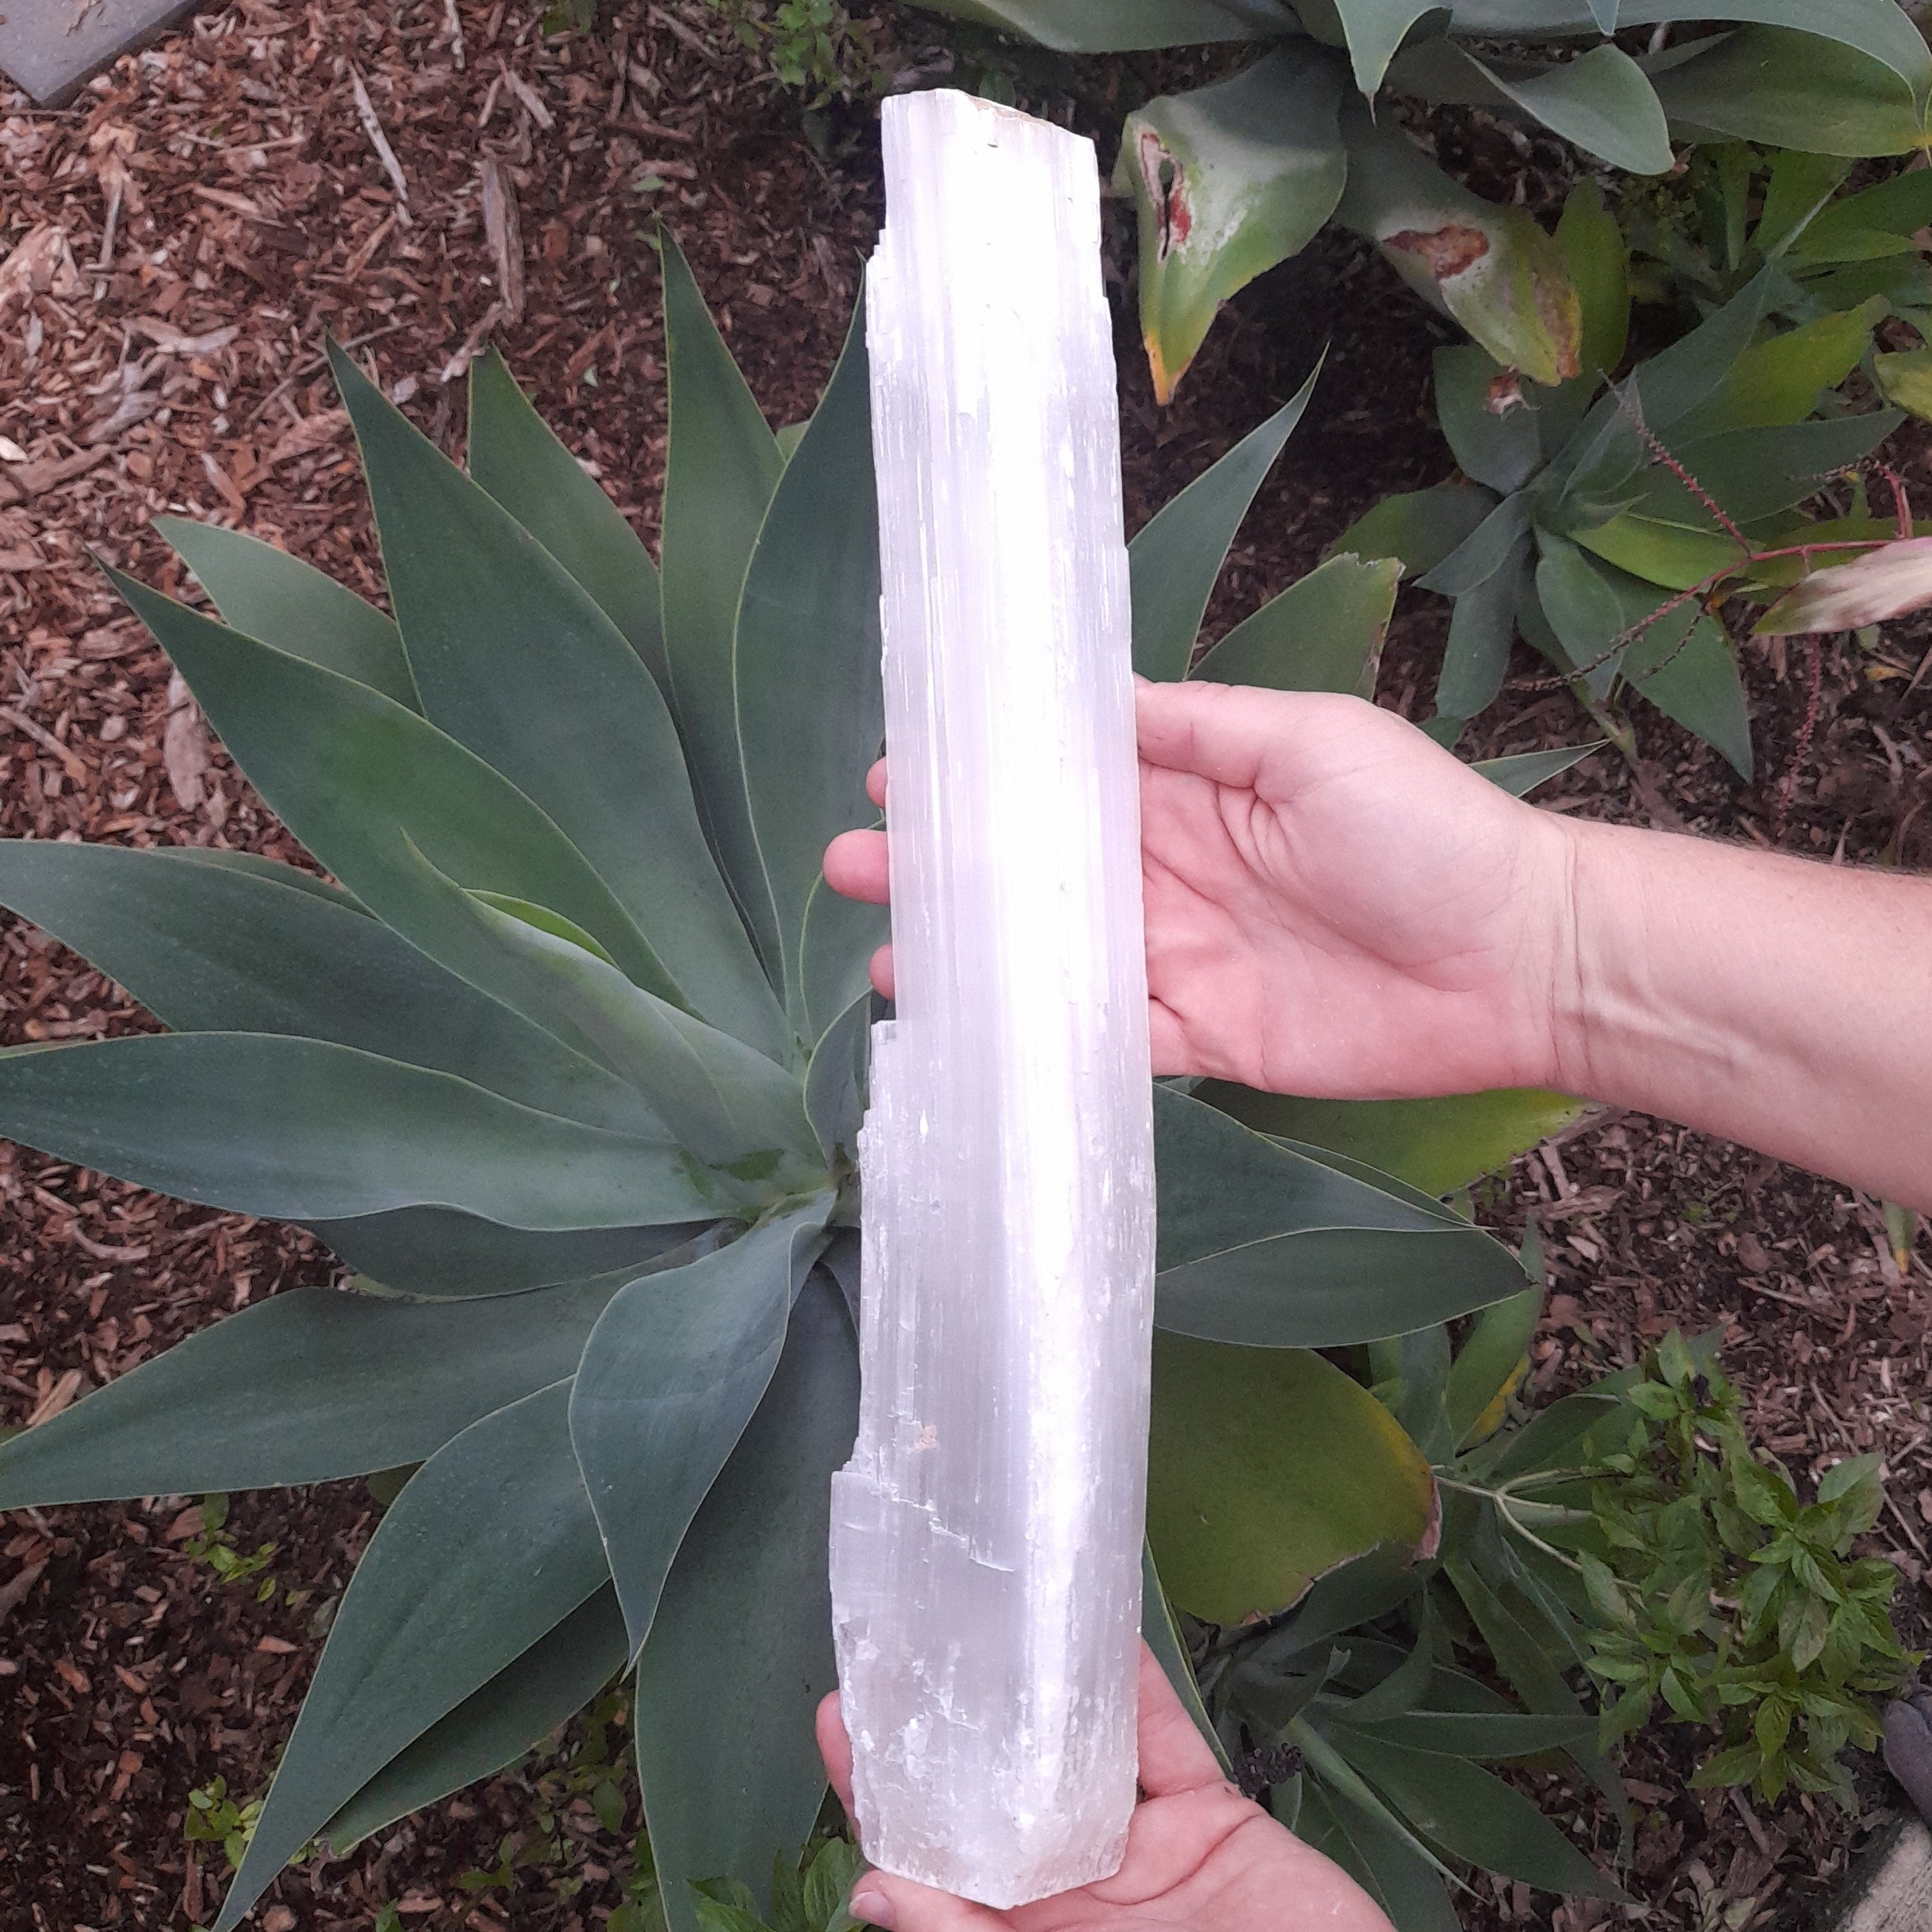 Satin Spar (sometimes confused with Selenite) ~ Natural Stick (each)